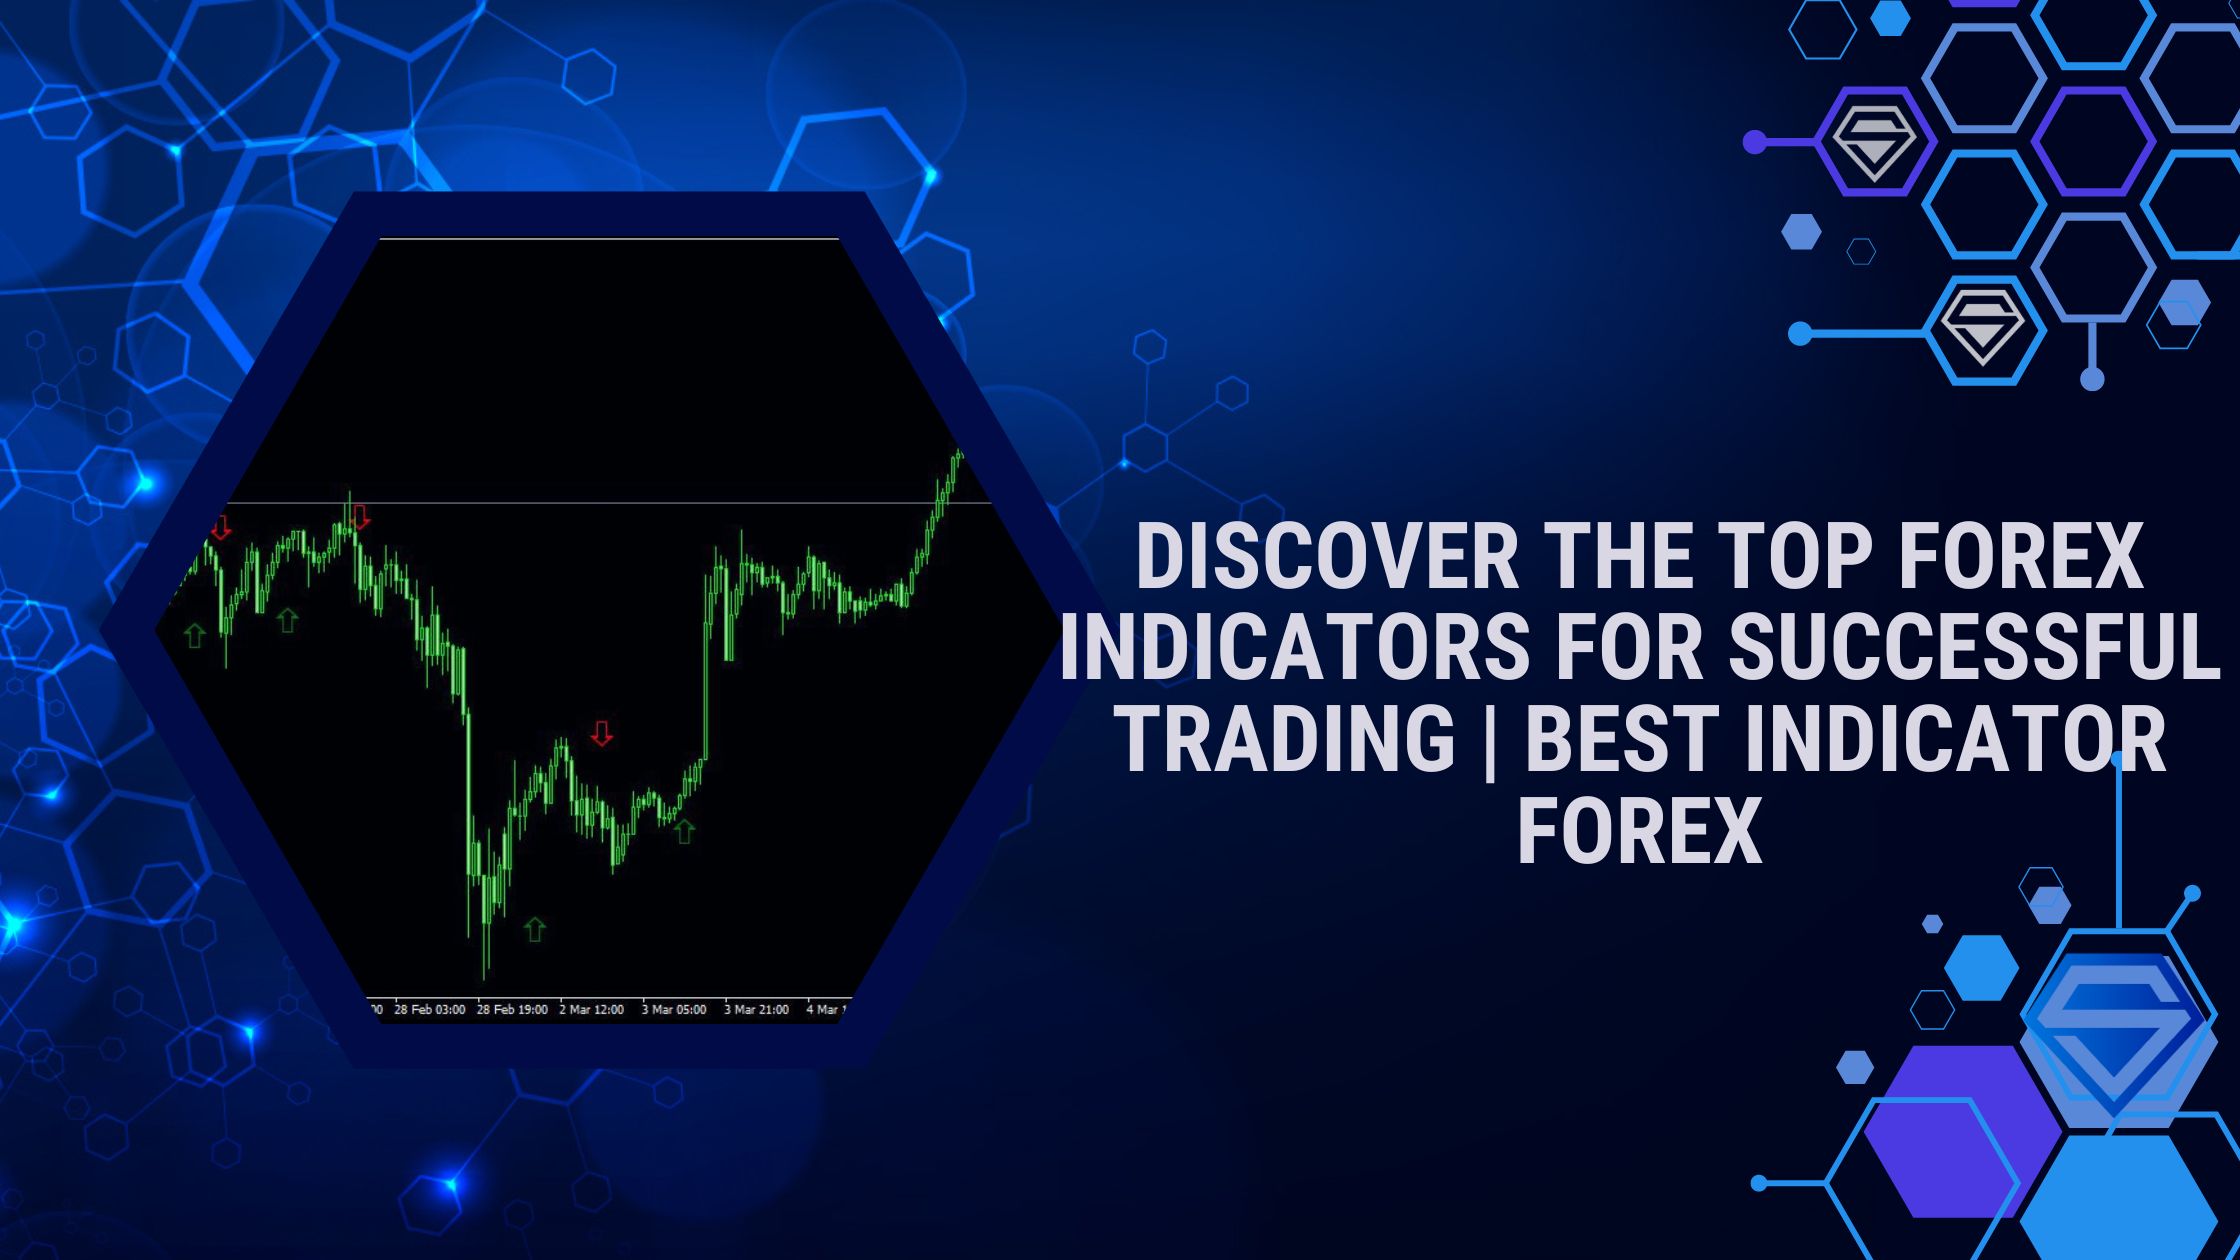 What are the Best Indicators for Forex Trading?